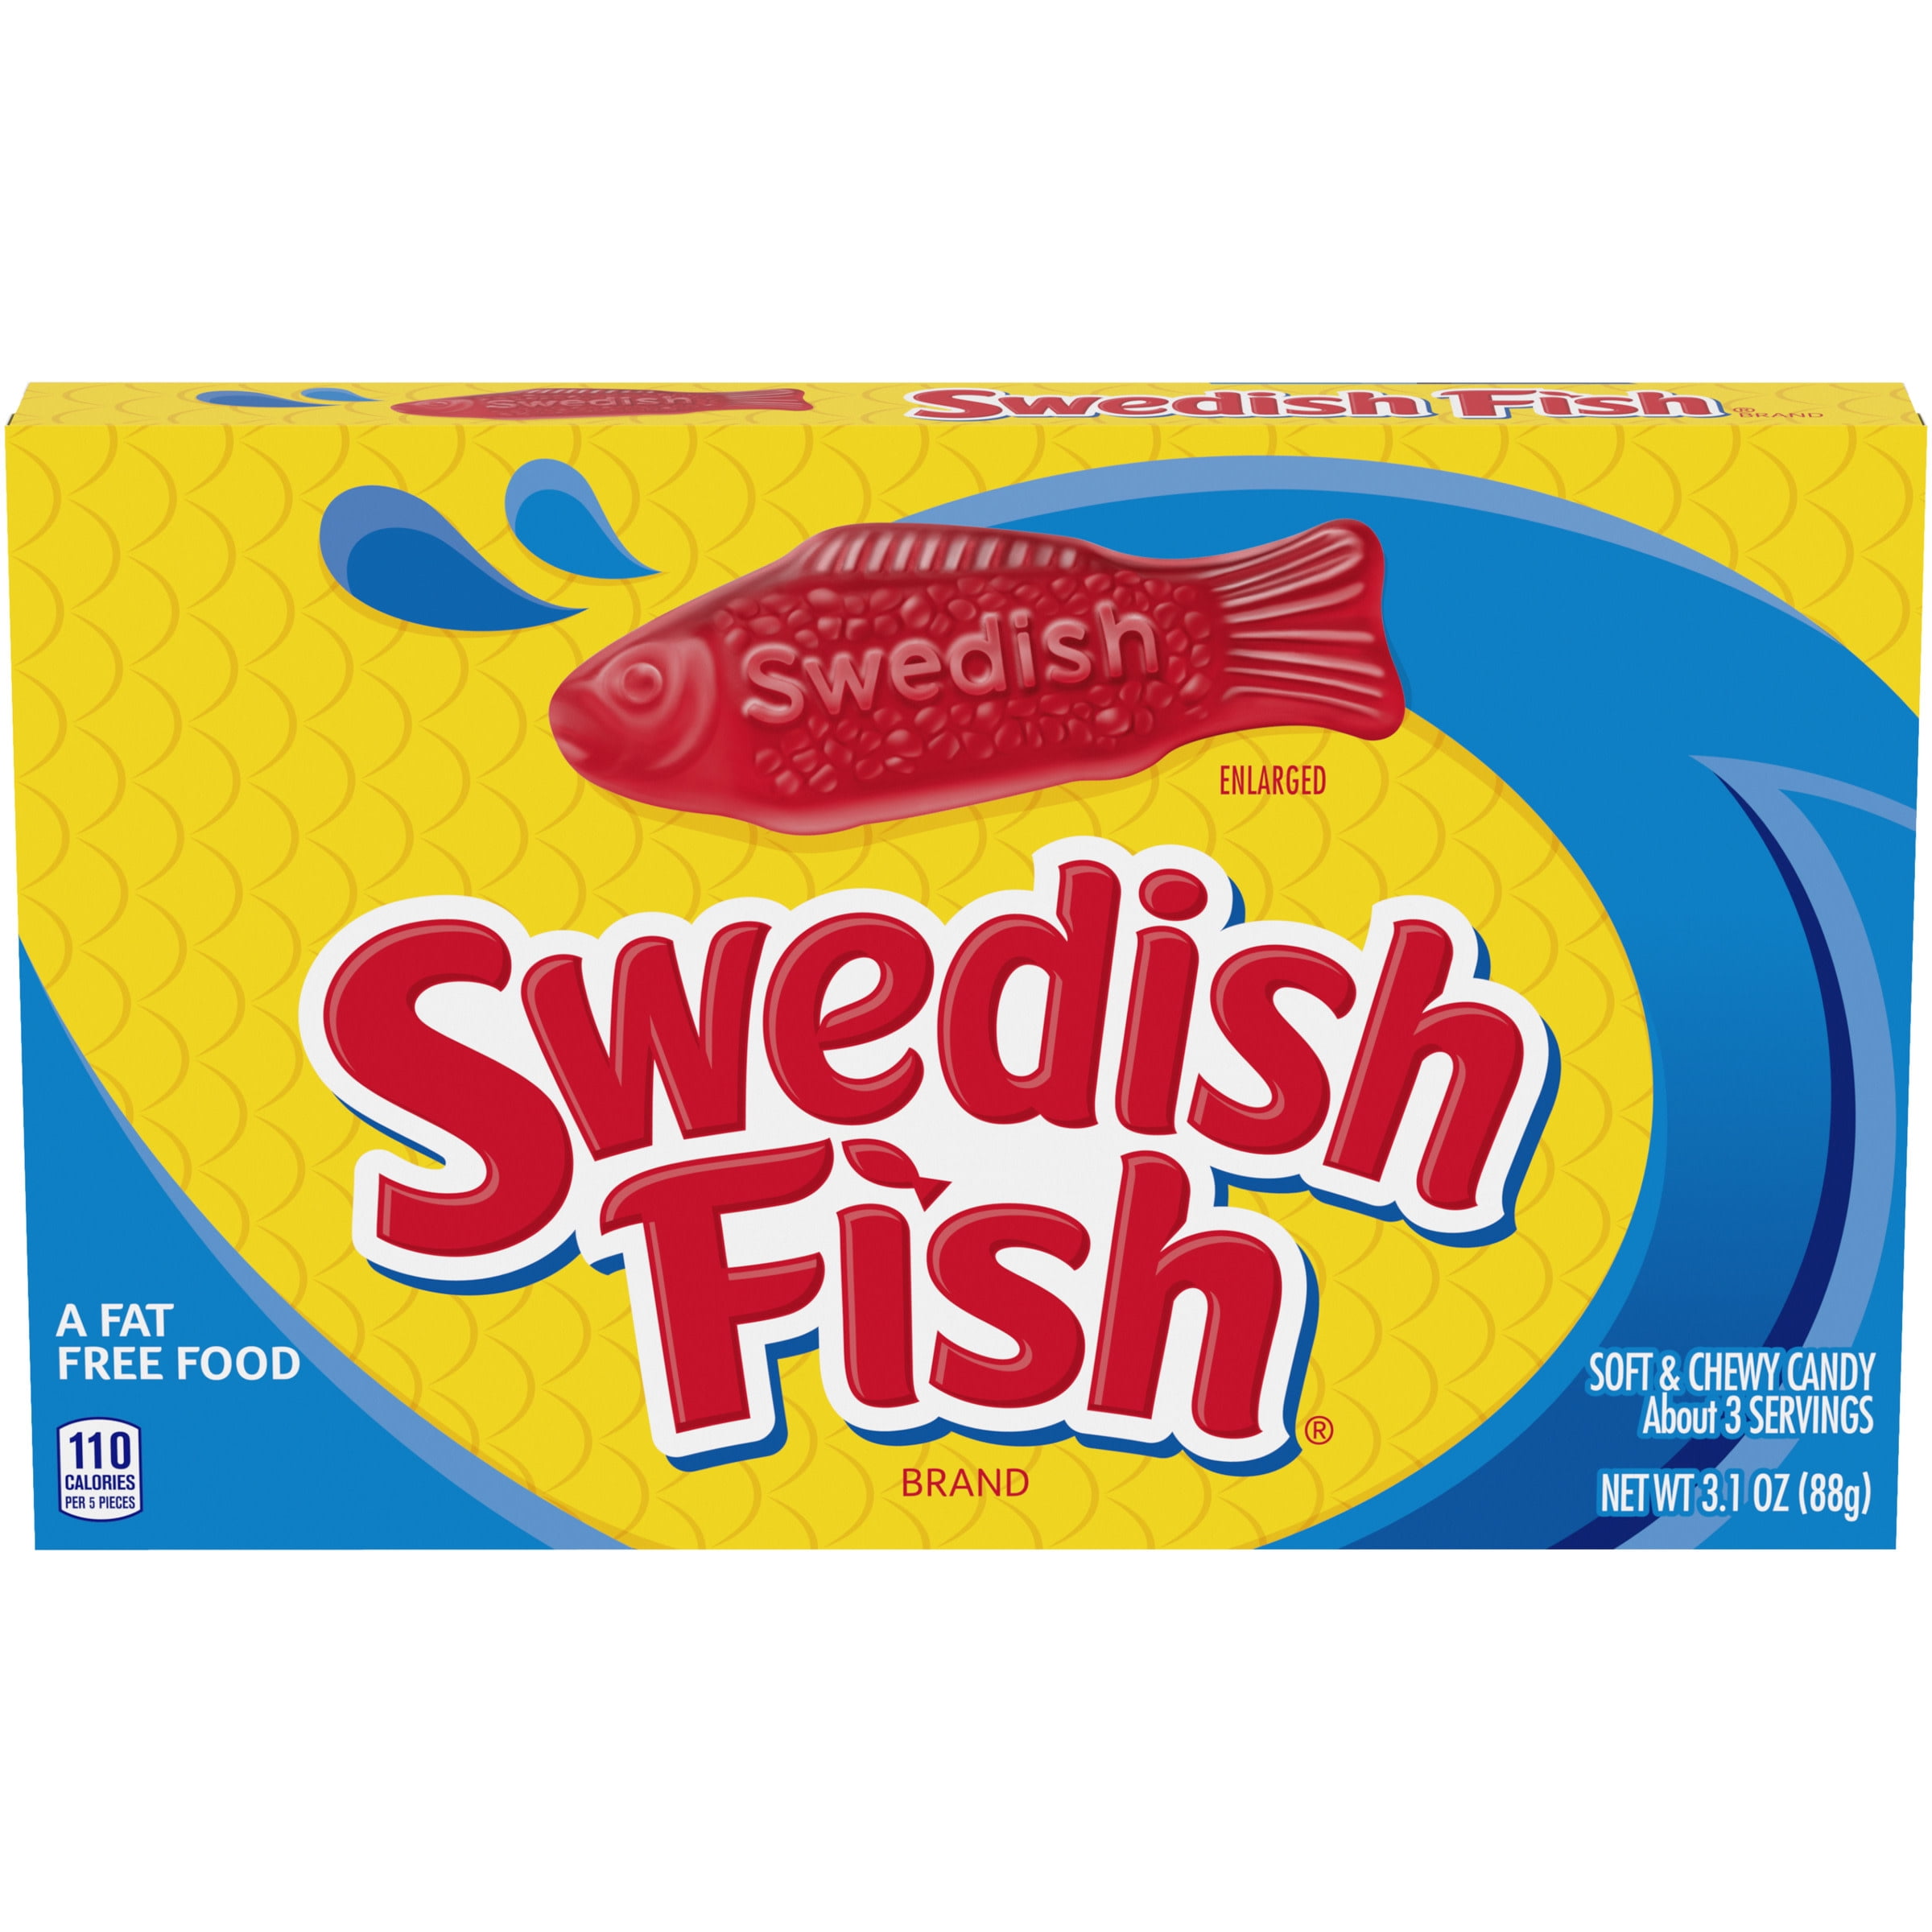 SWEDISH FISH Soft & Chewy Candy, Easter Candy, 3.1 oz Box